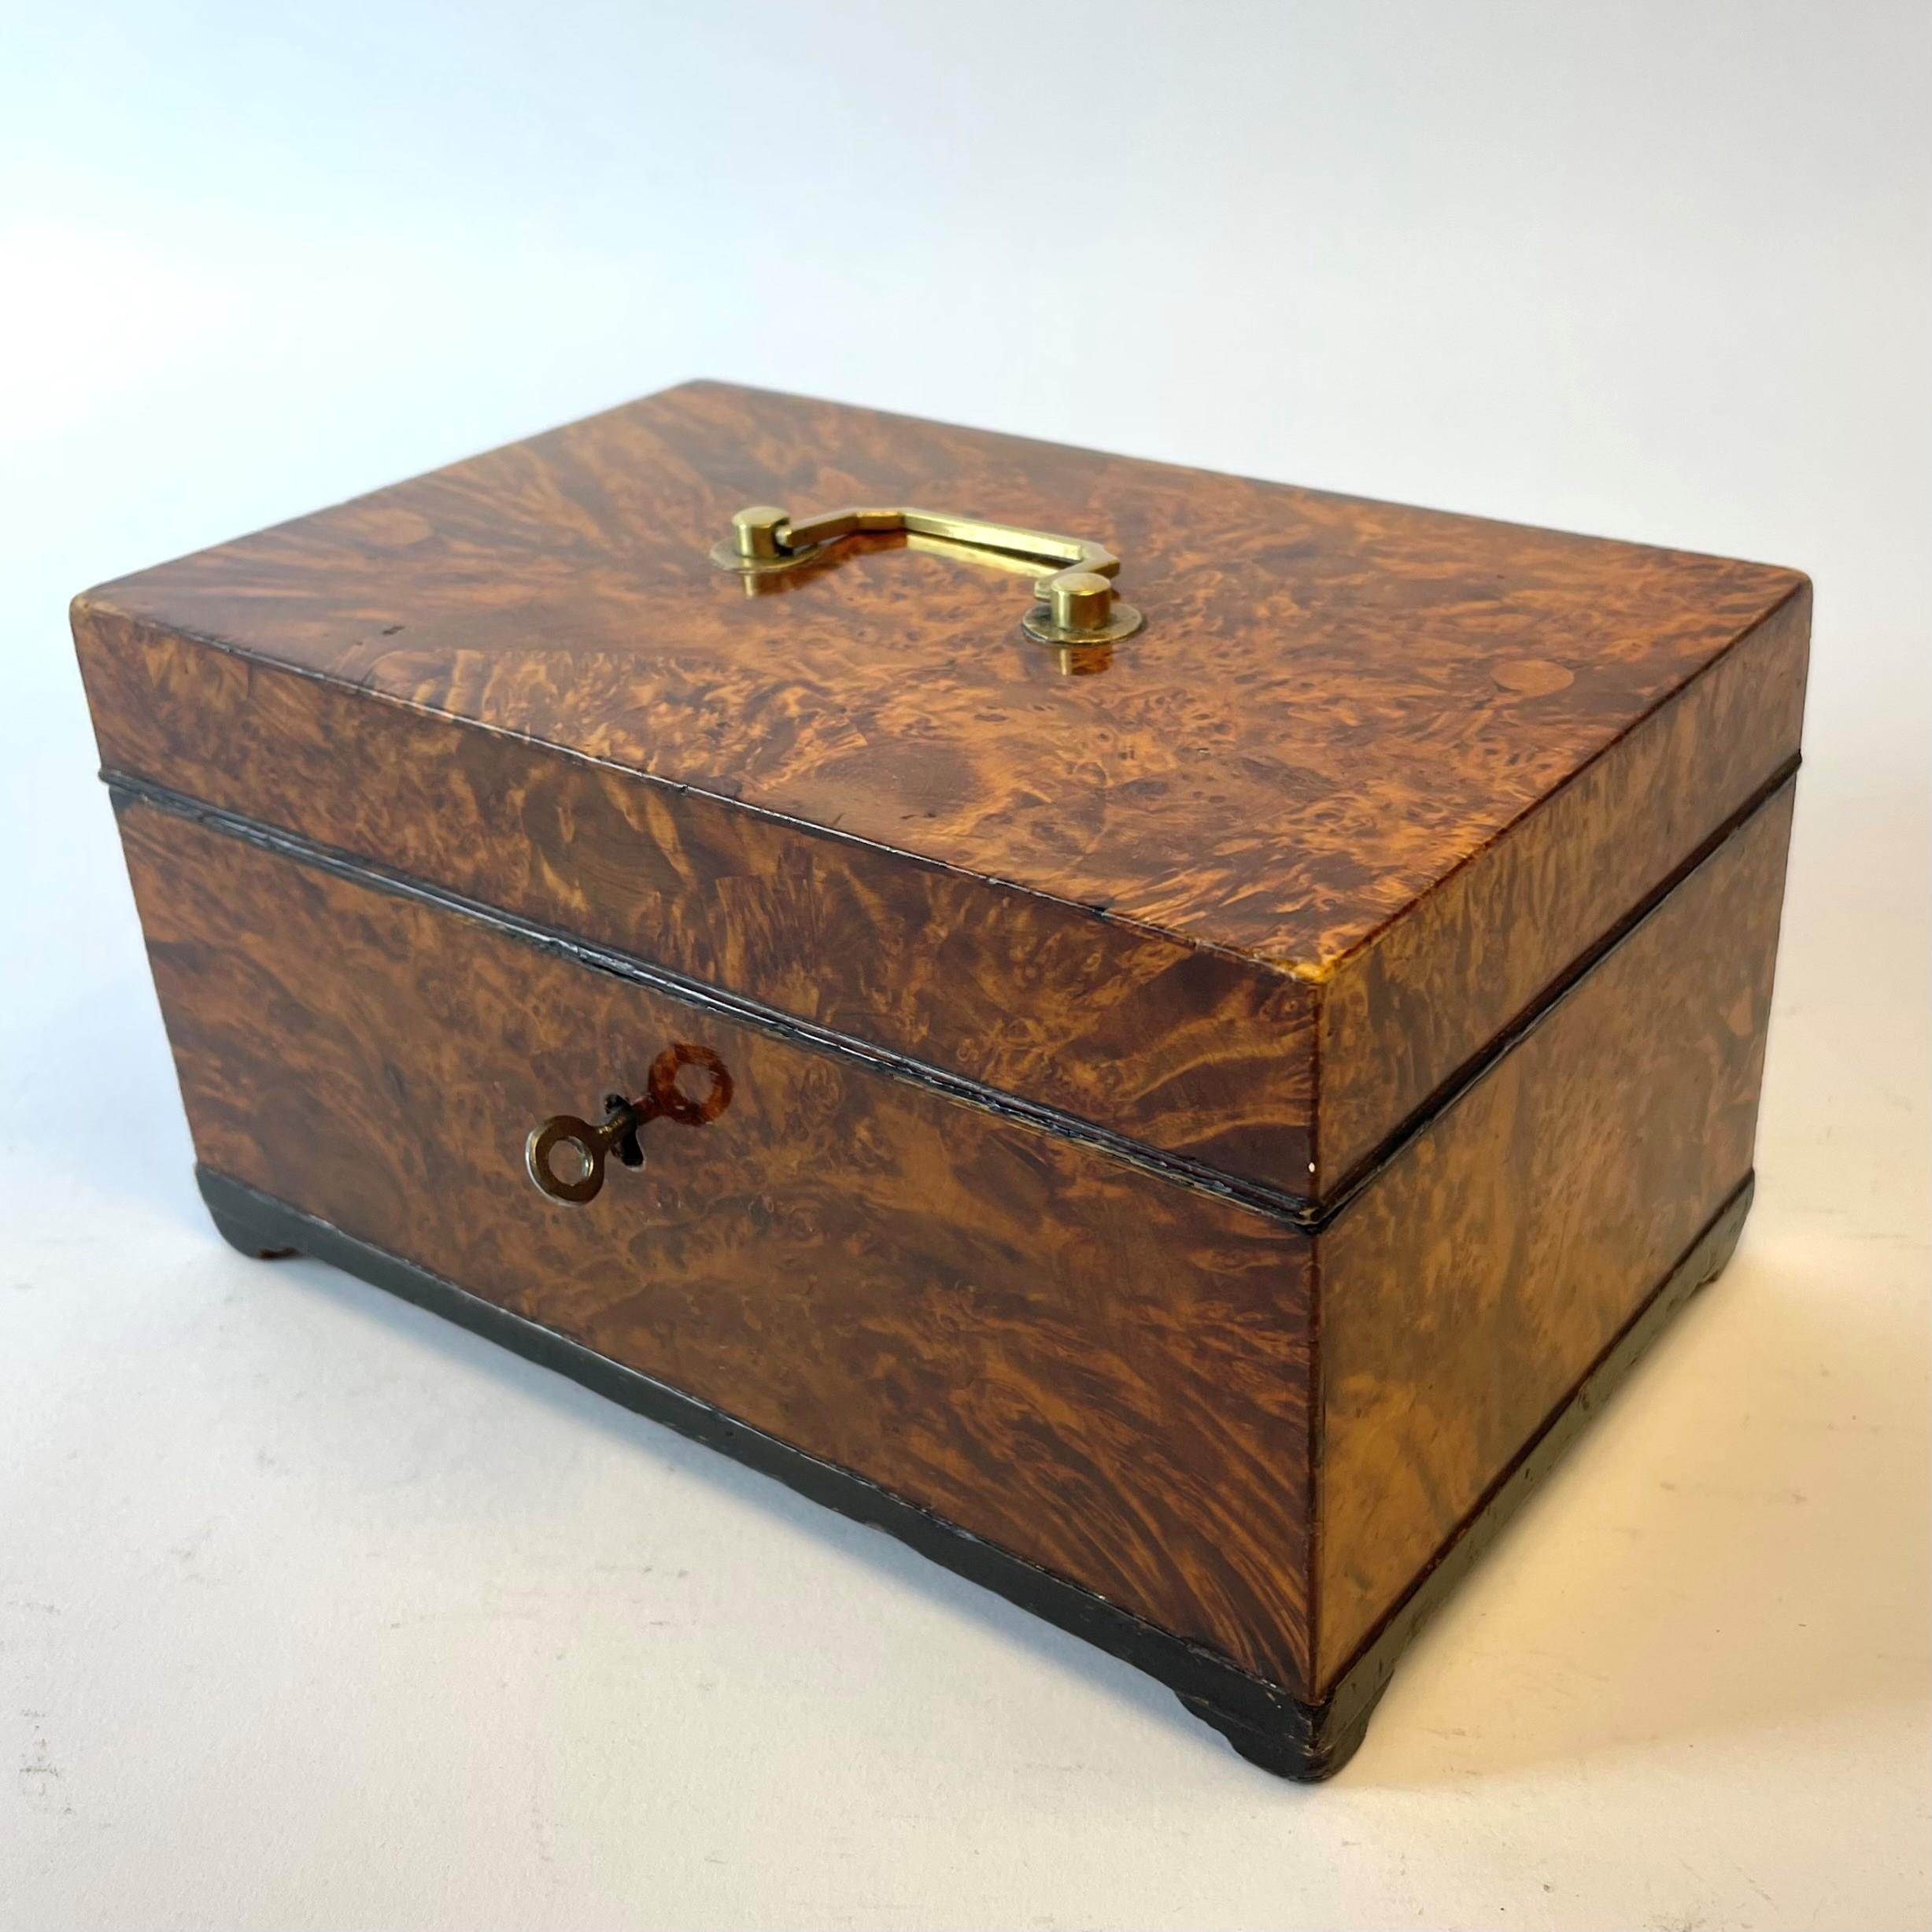 Rare and beautiful box in alder root with a brass handle. Gustavian, late 18th century from cities around the lake Mälaren in Sweden. Beautiful patina in the woodwork. The inside of the box which is lined with colored paper (original) has a damage